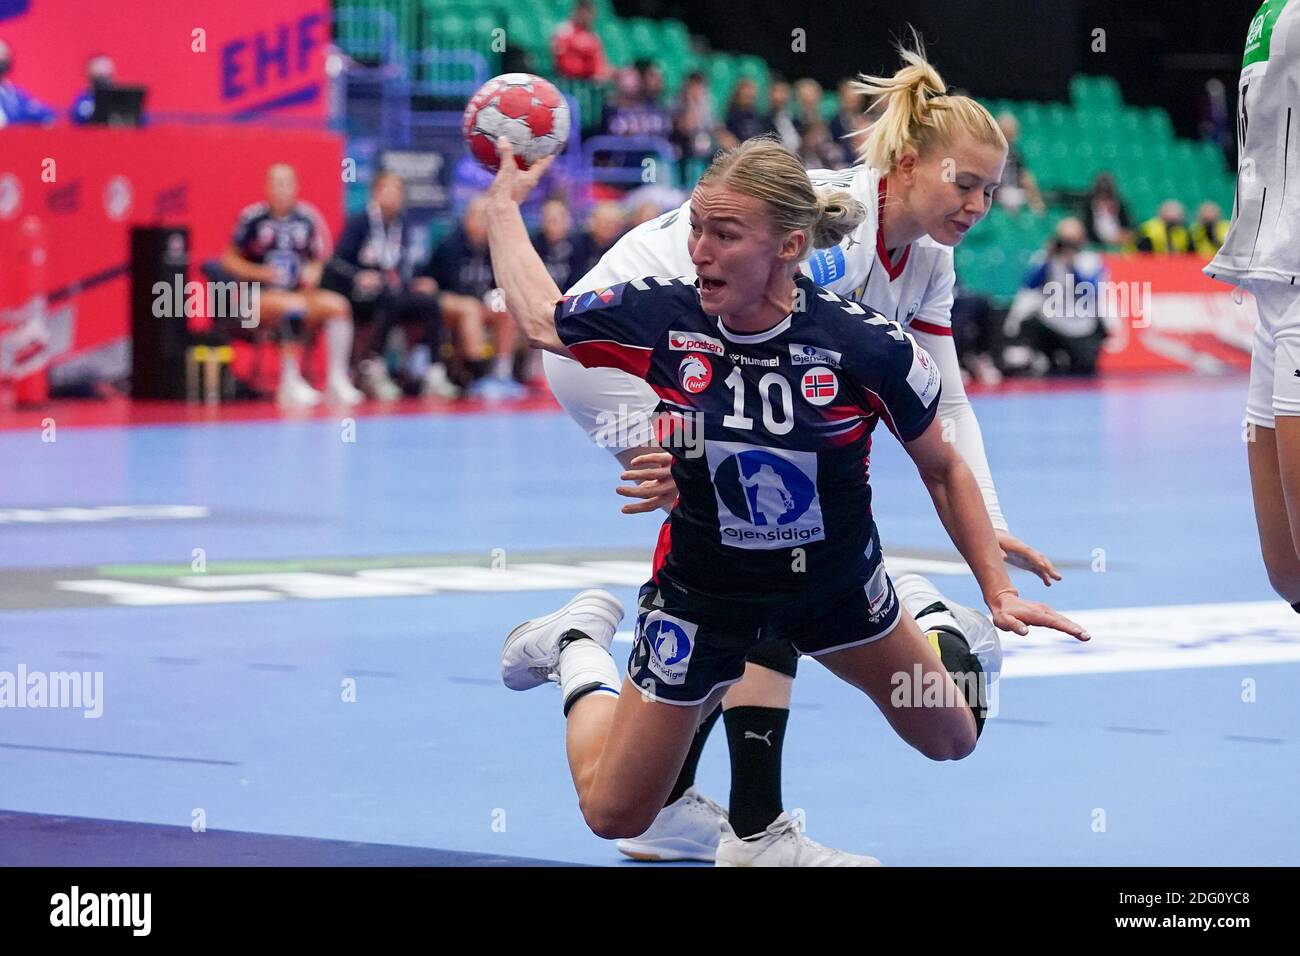 DENMARK - DECEMBER 5: Stine oftedahl #10 of Norway during the Women's EHF Euro 2020 match between Germany and Norway at Sydbank Arena Stock Photo - Alamy